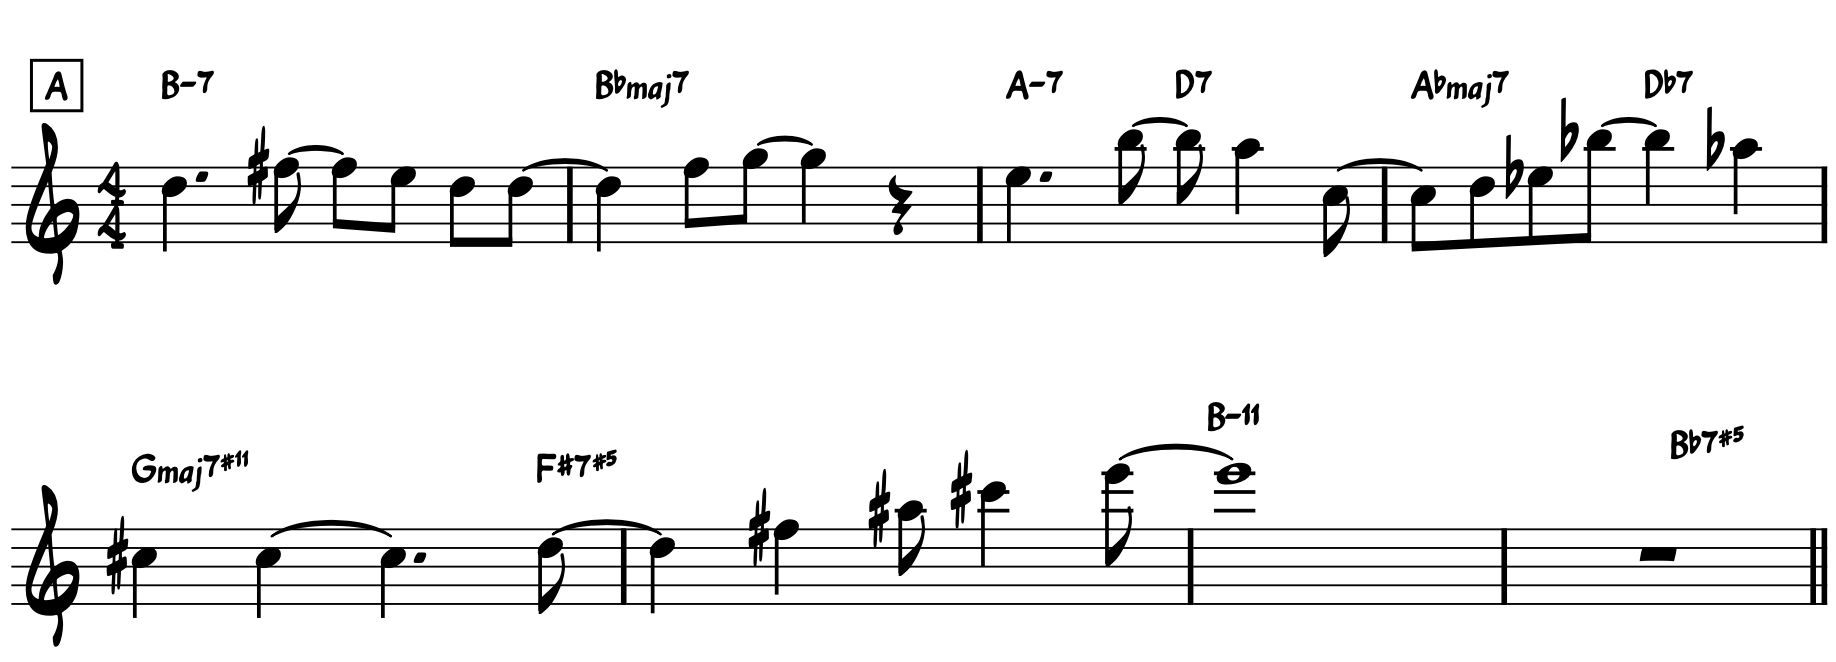 Lead Sheet Jazz tutorial: Poorly formatted lead sheet where chord symbols are too small. 